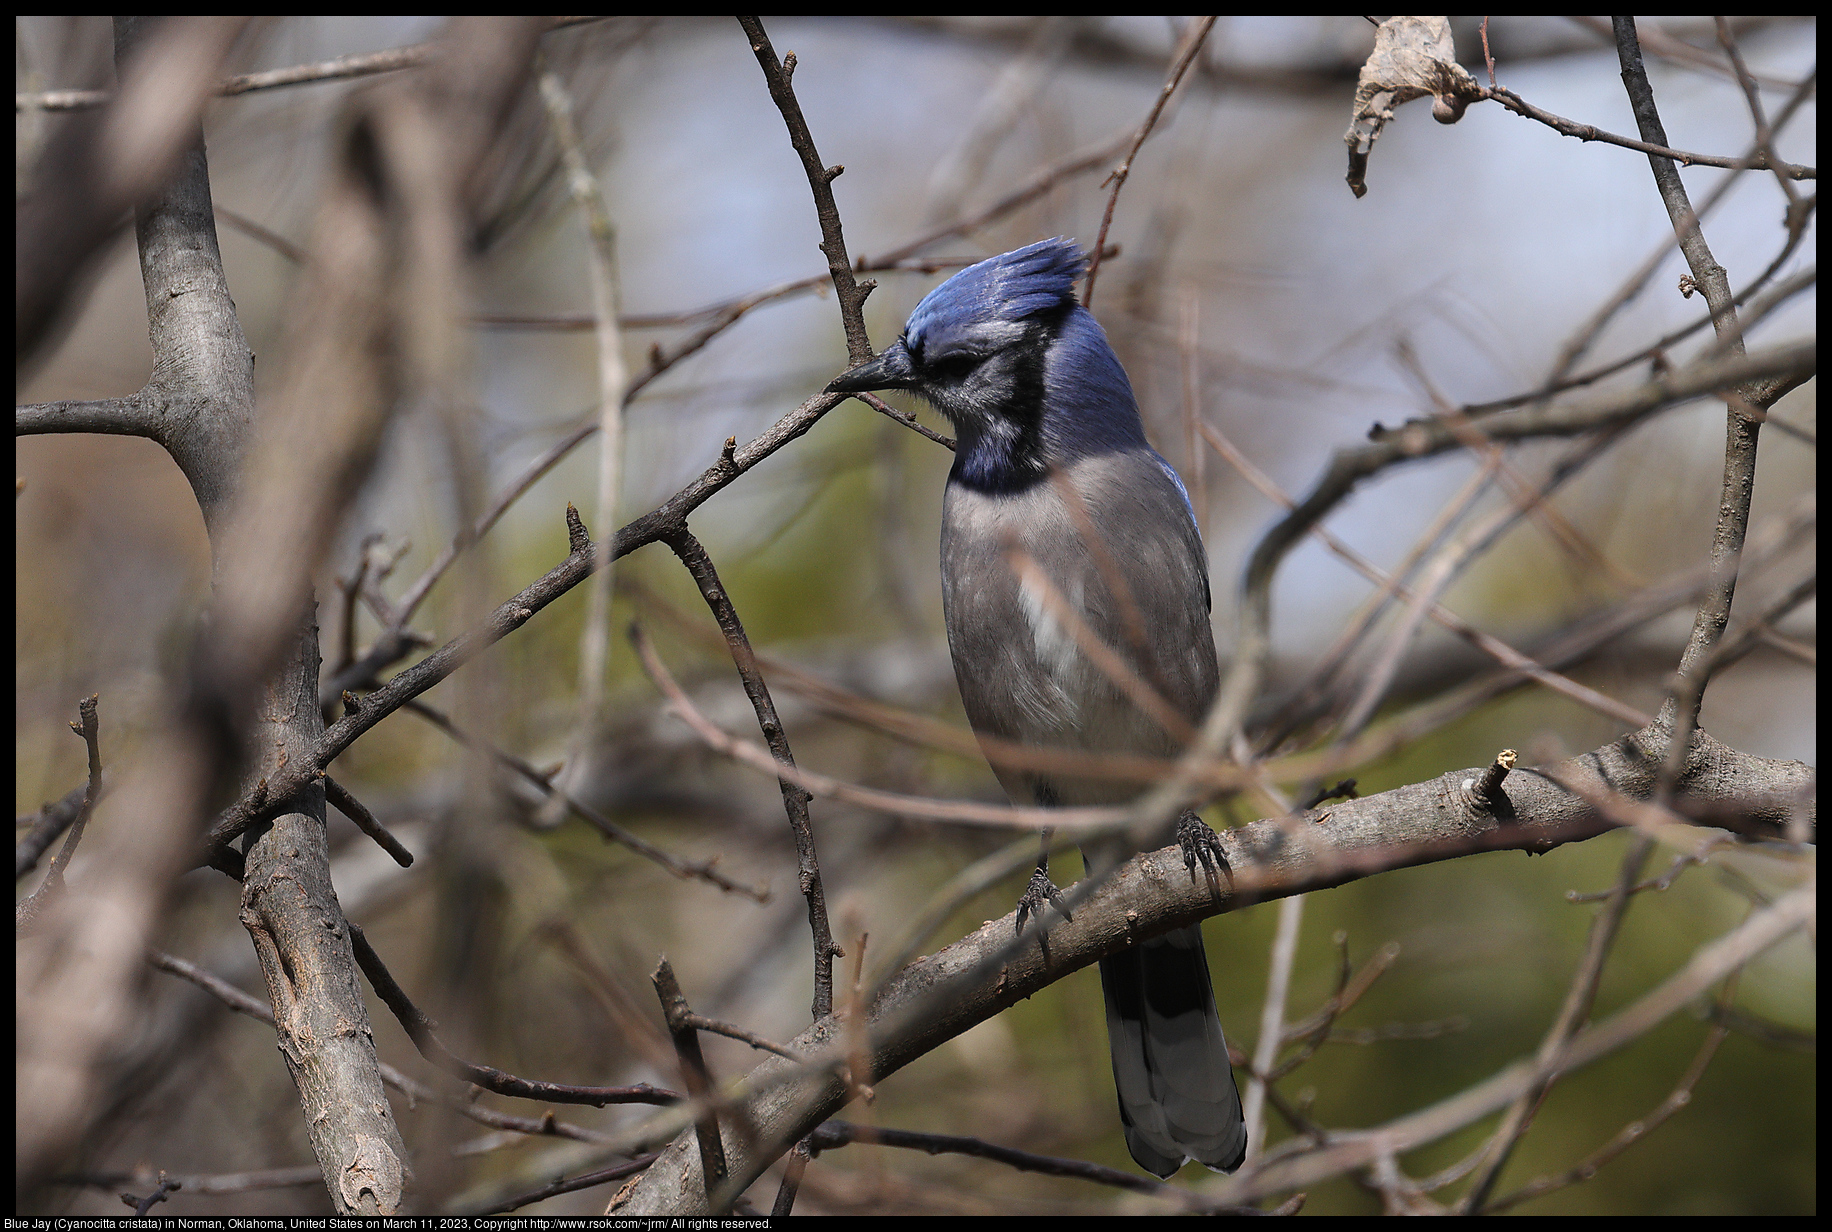 Blue Jay (Cyanocitta cristata) in Norman, Oklahoma, United States on March 11, 2023